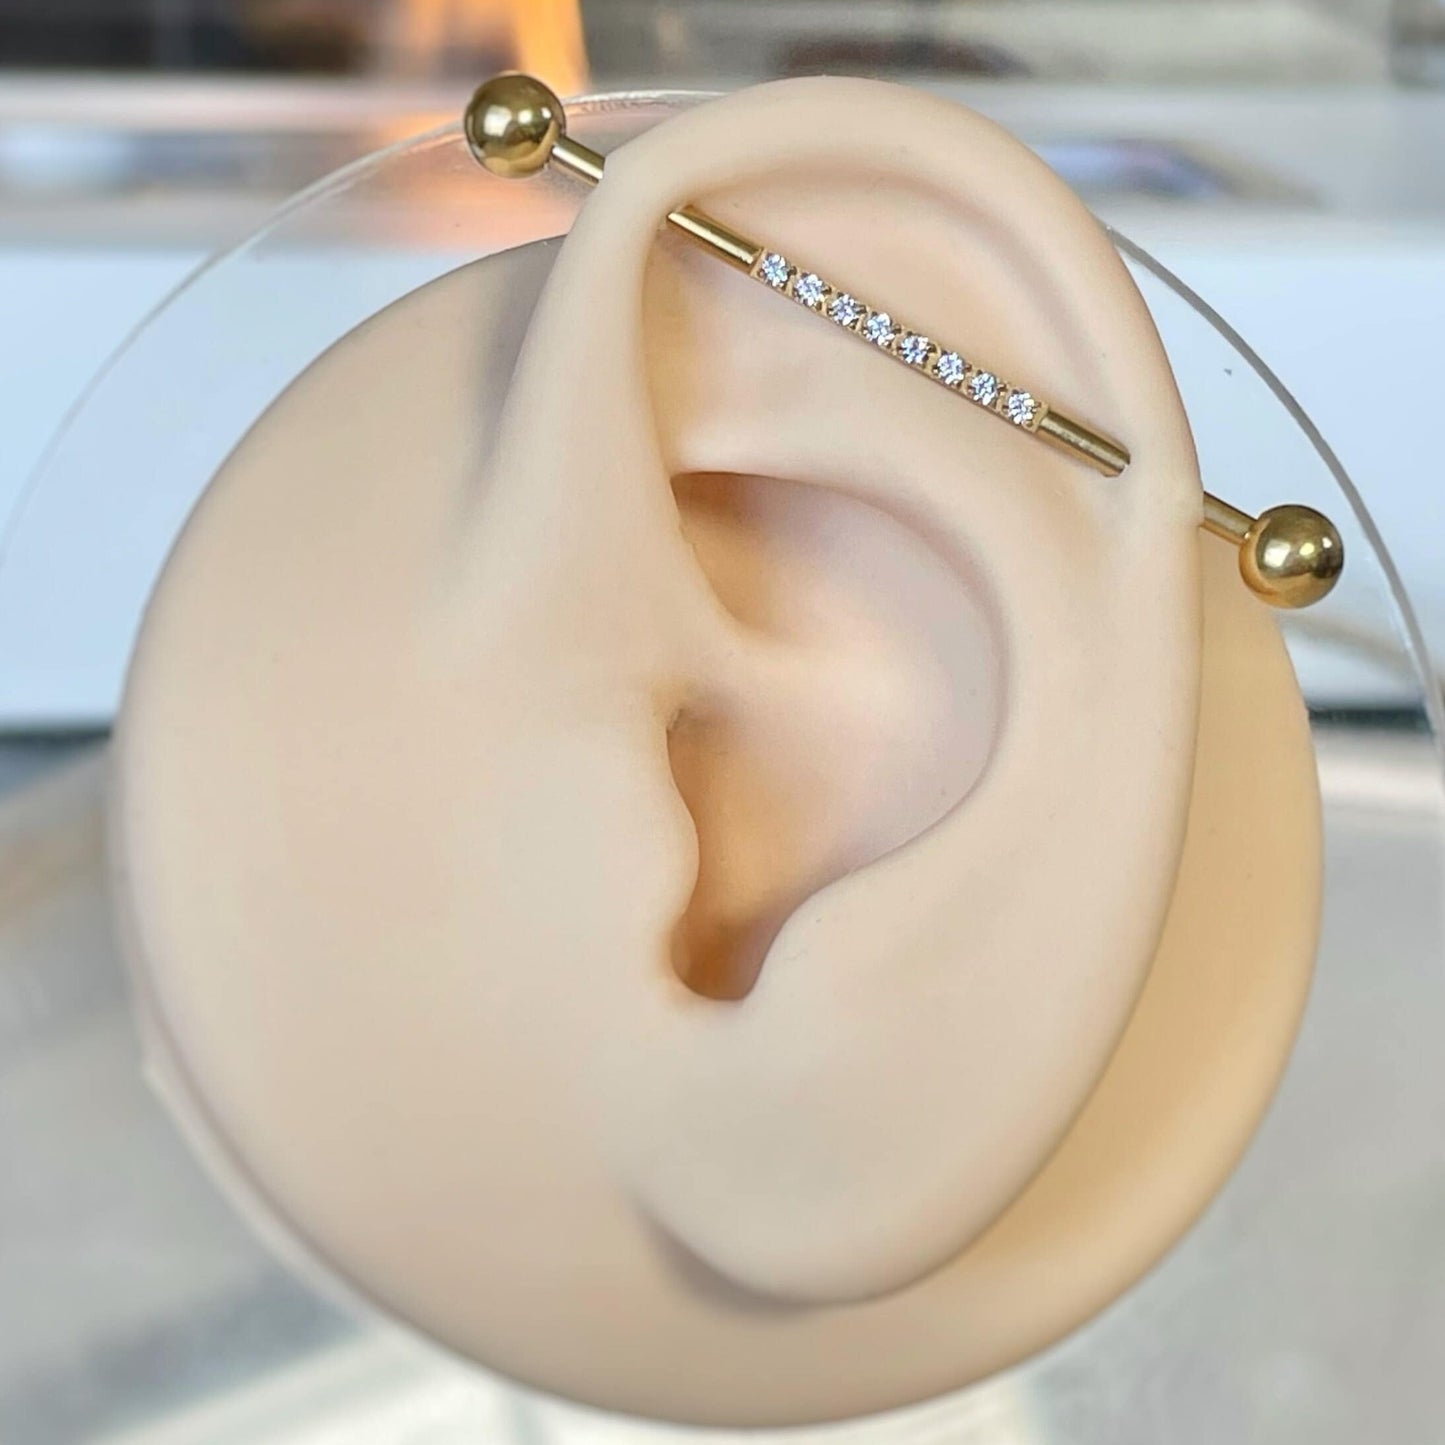 Gold CZ Industrial Piercing Jewelry (14G | 38mm (1.5") | Surgical Steel | Several Color Options)